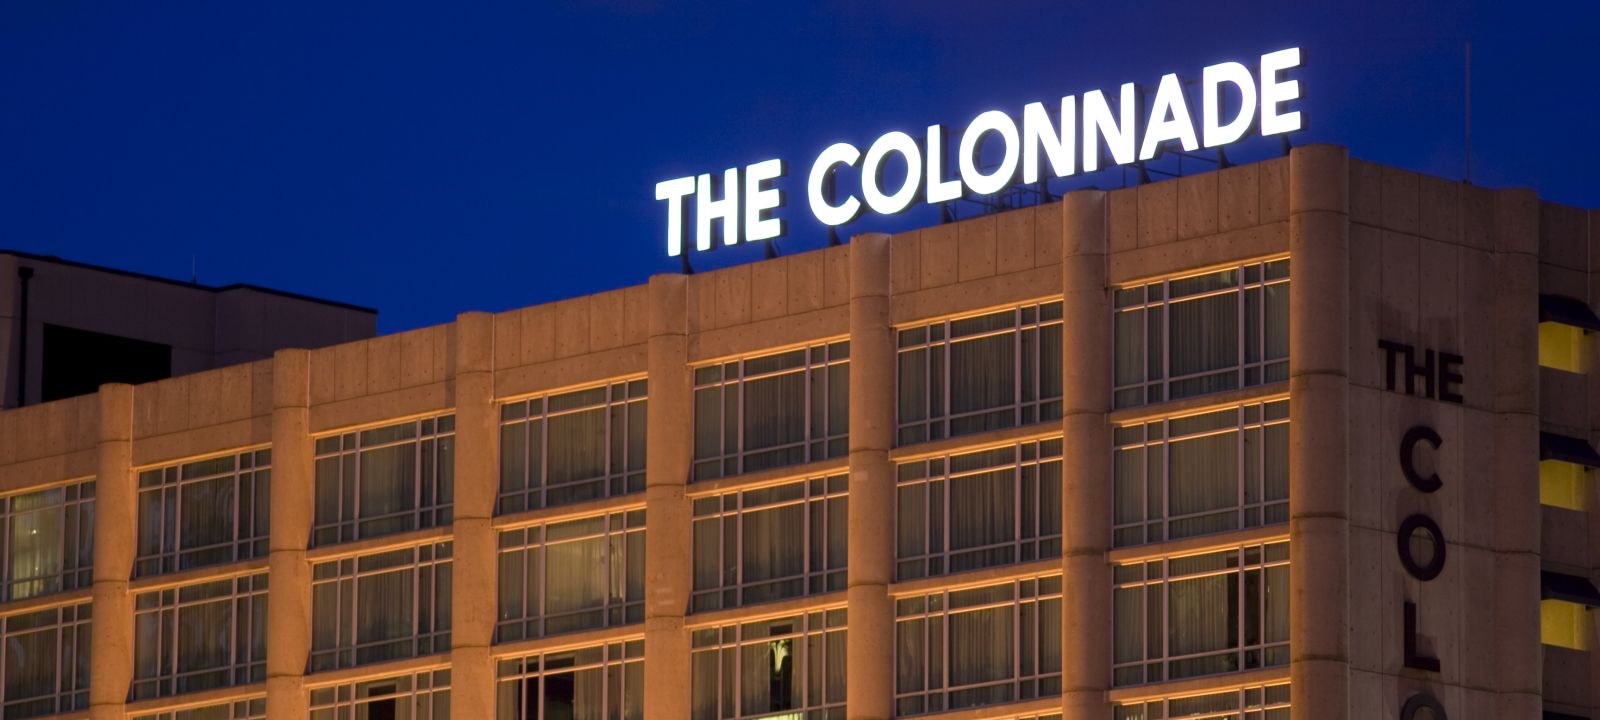 The Colonnade Hotel Exterior Building Night View